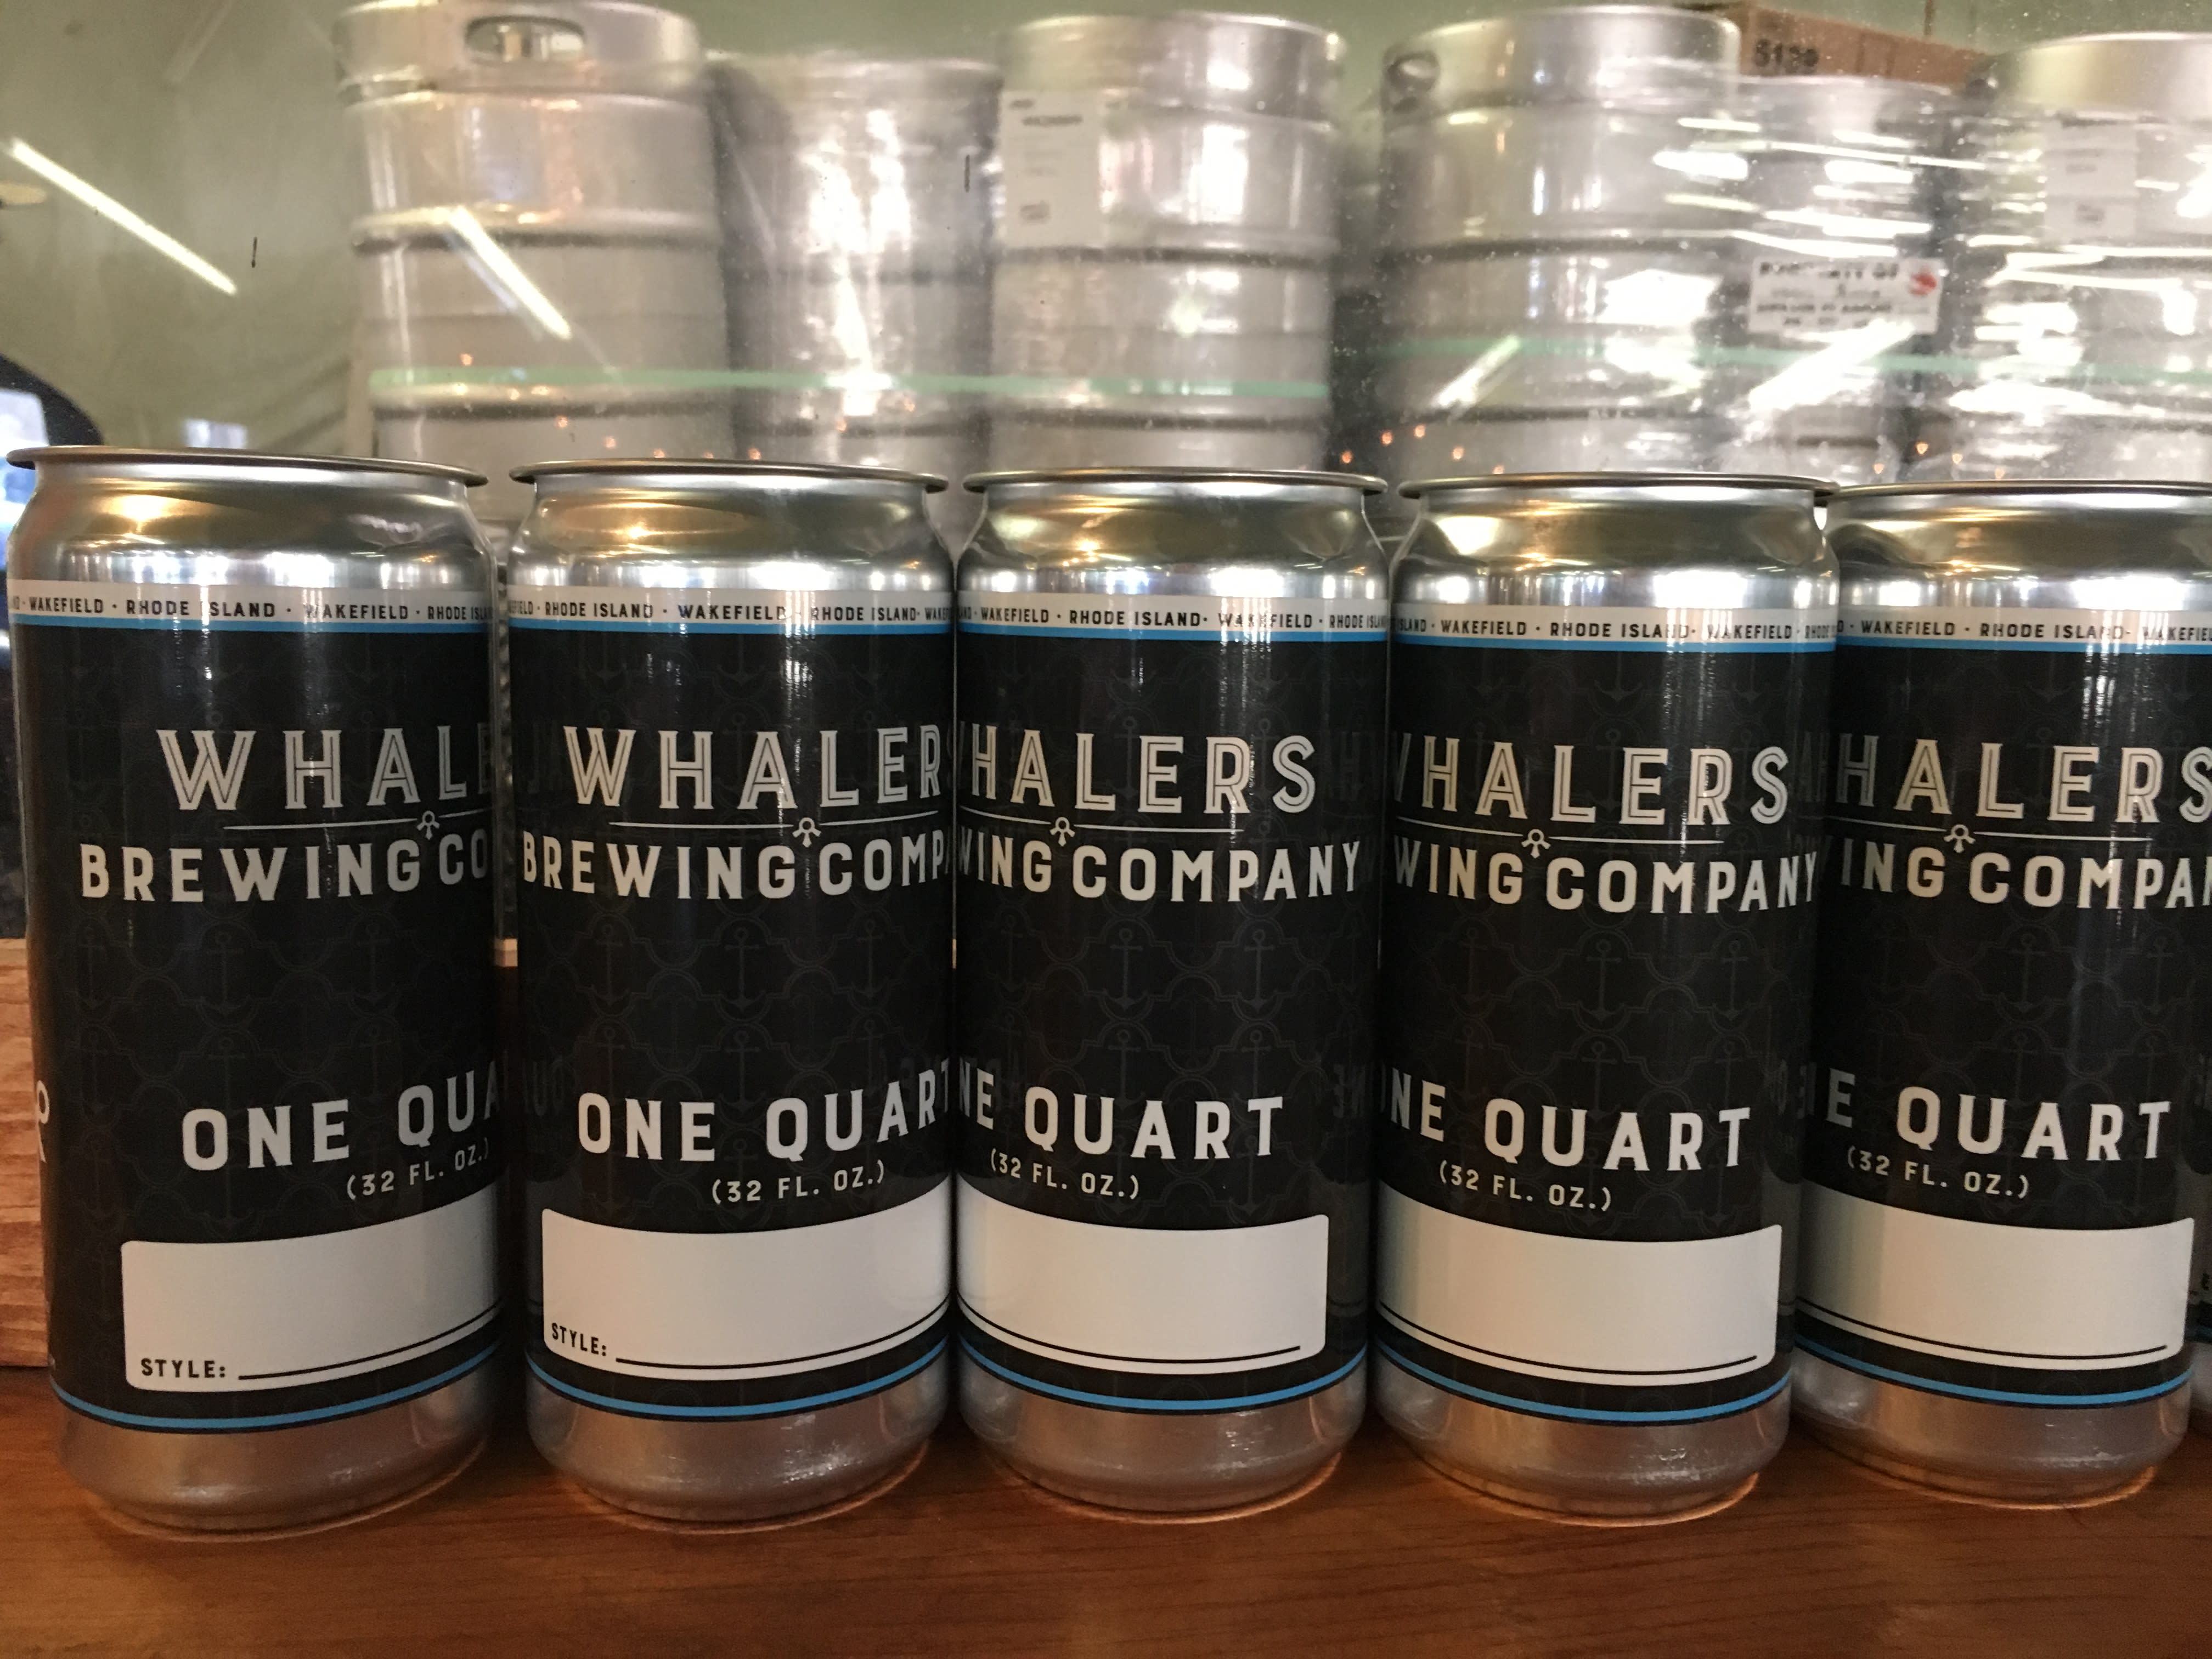 Whaler's Brewing Co.